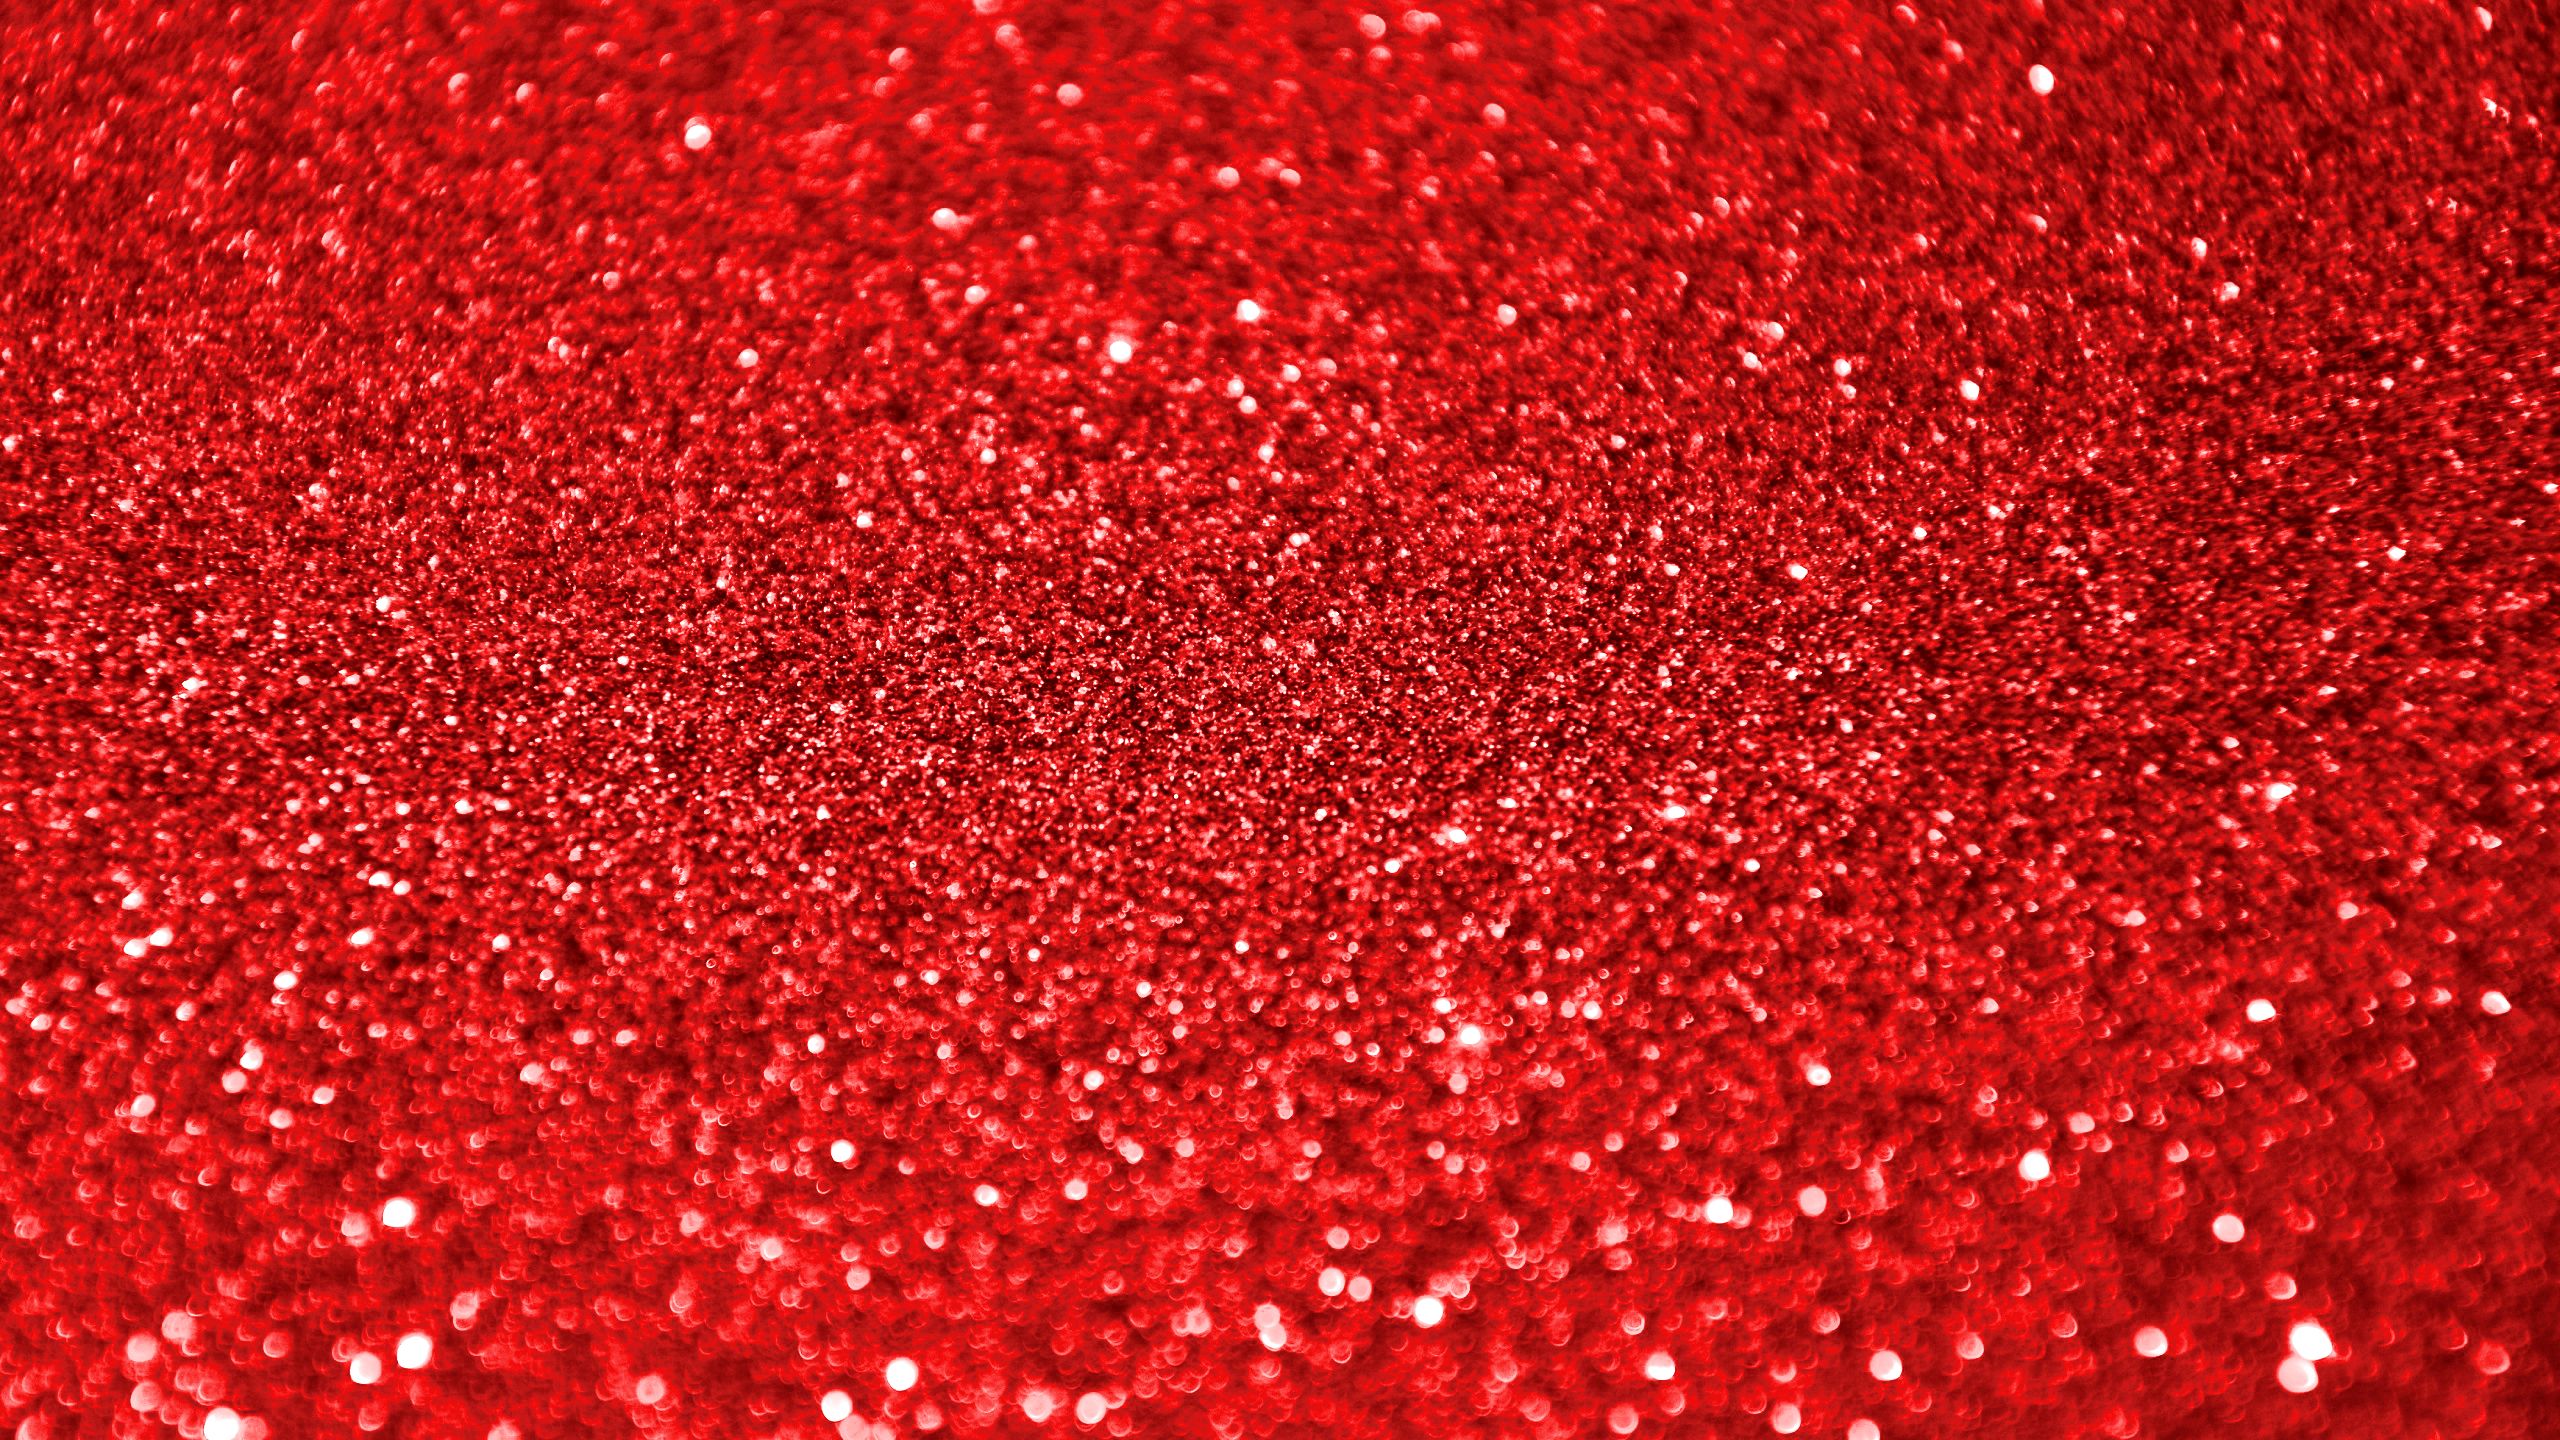 Clip Art Red Glittery Backgrounds - High Resolution Sparkly Red Glitter - HD Wallpaper 